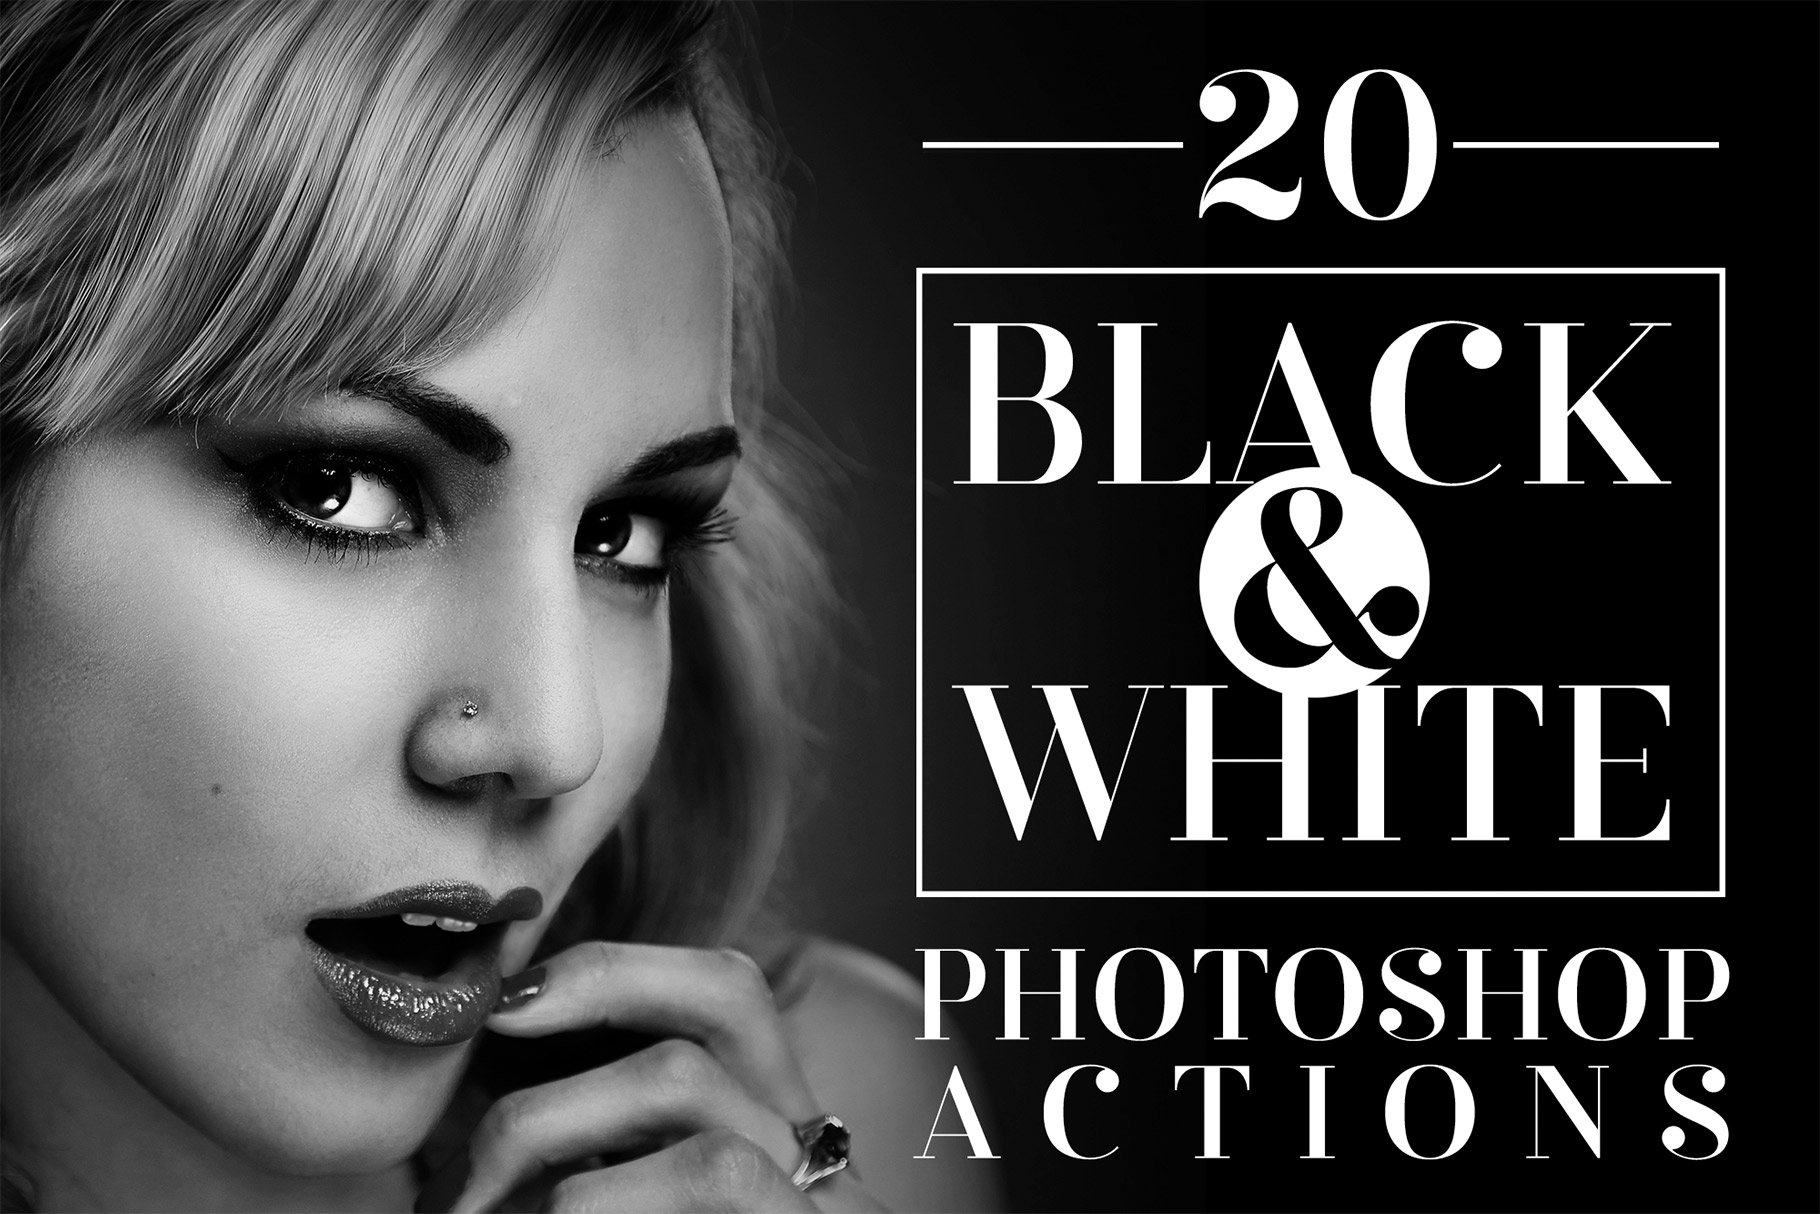 Black & White Photo Effect Actionscover image.